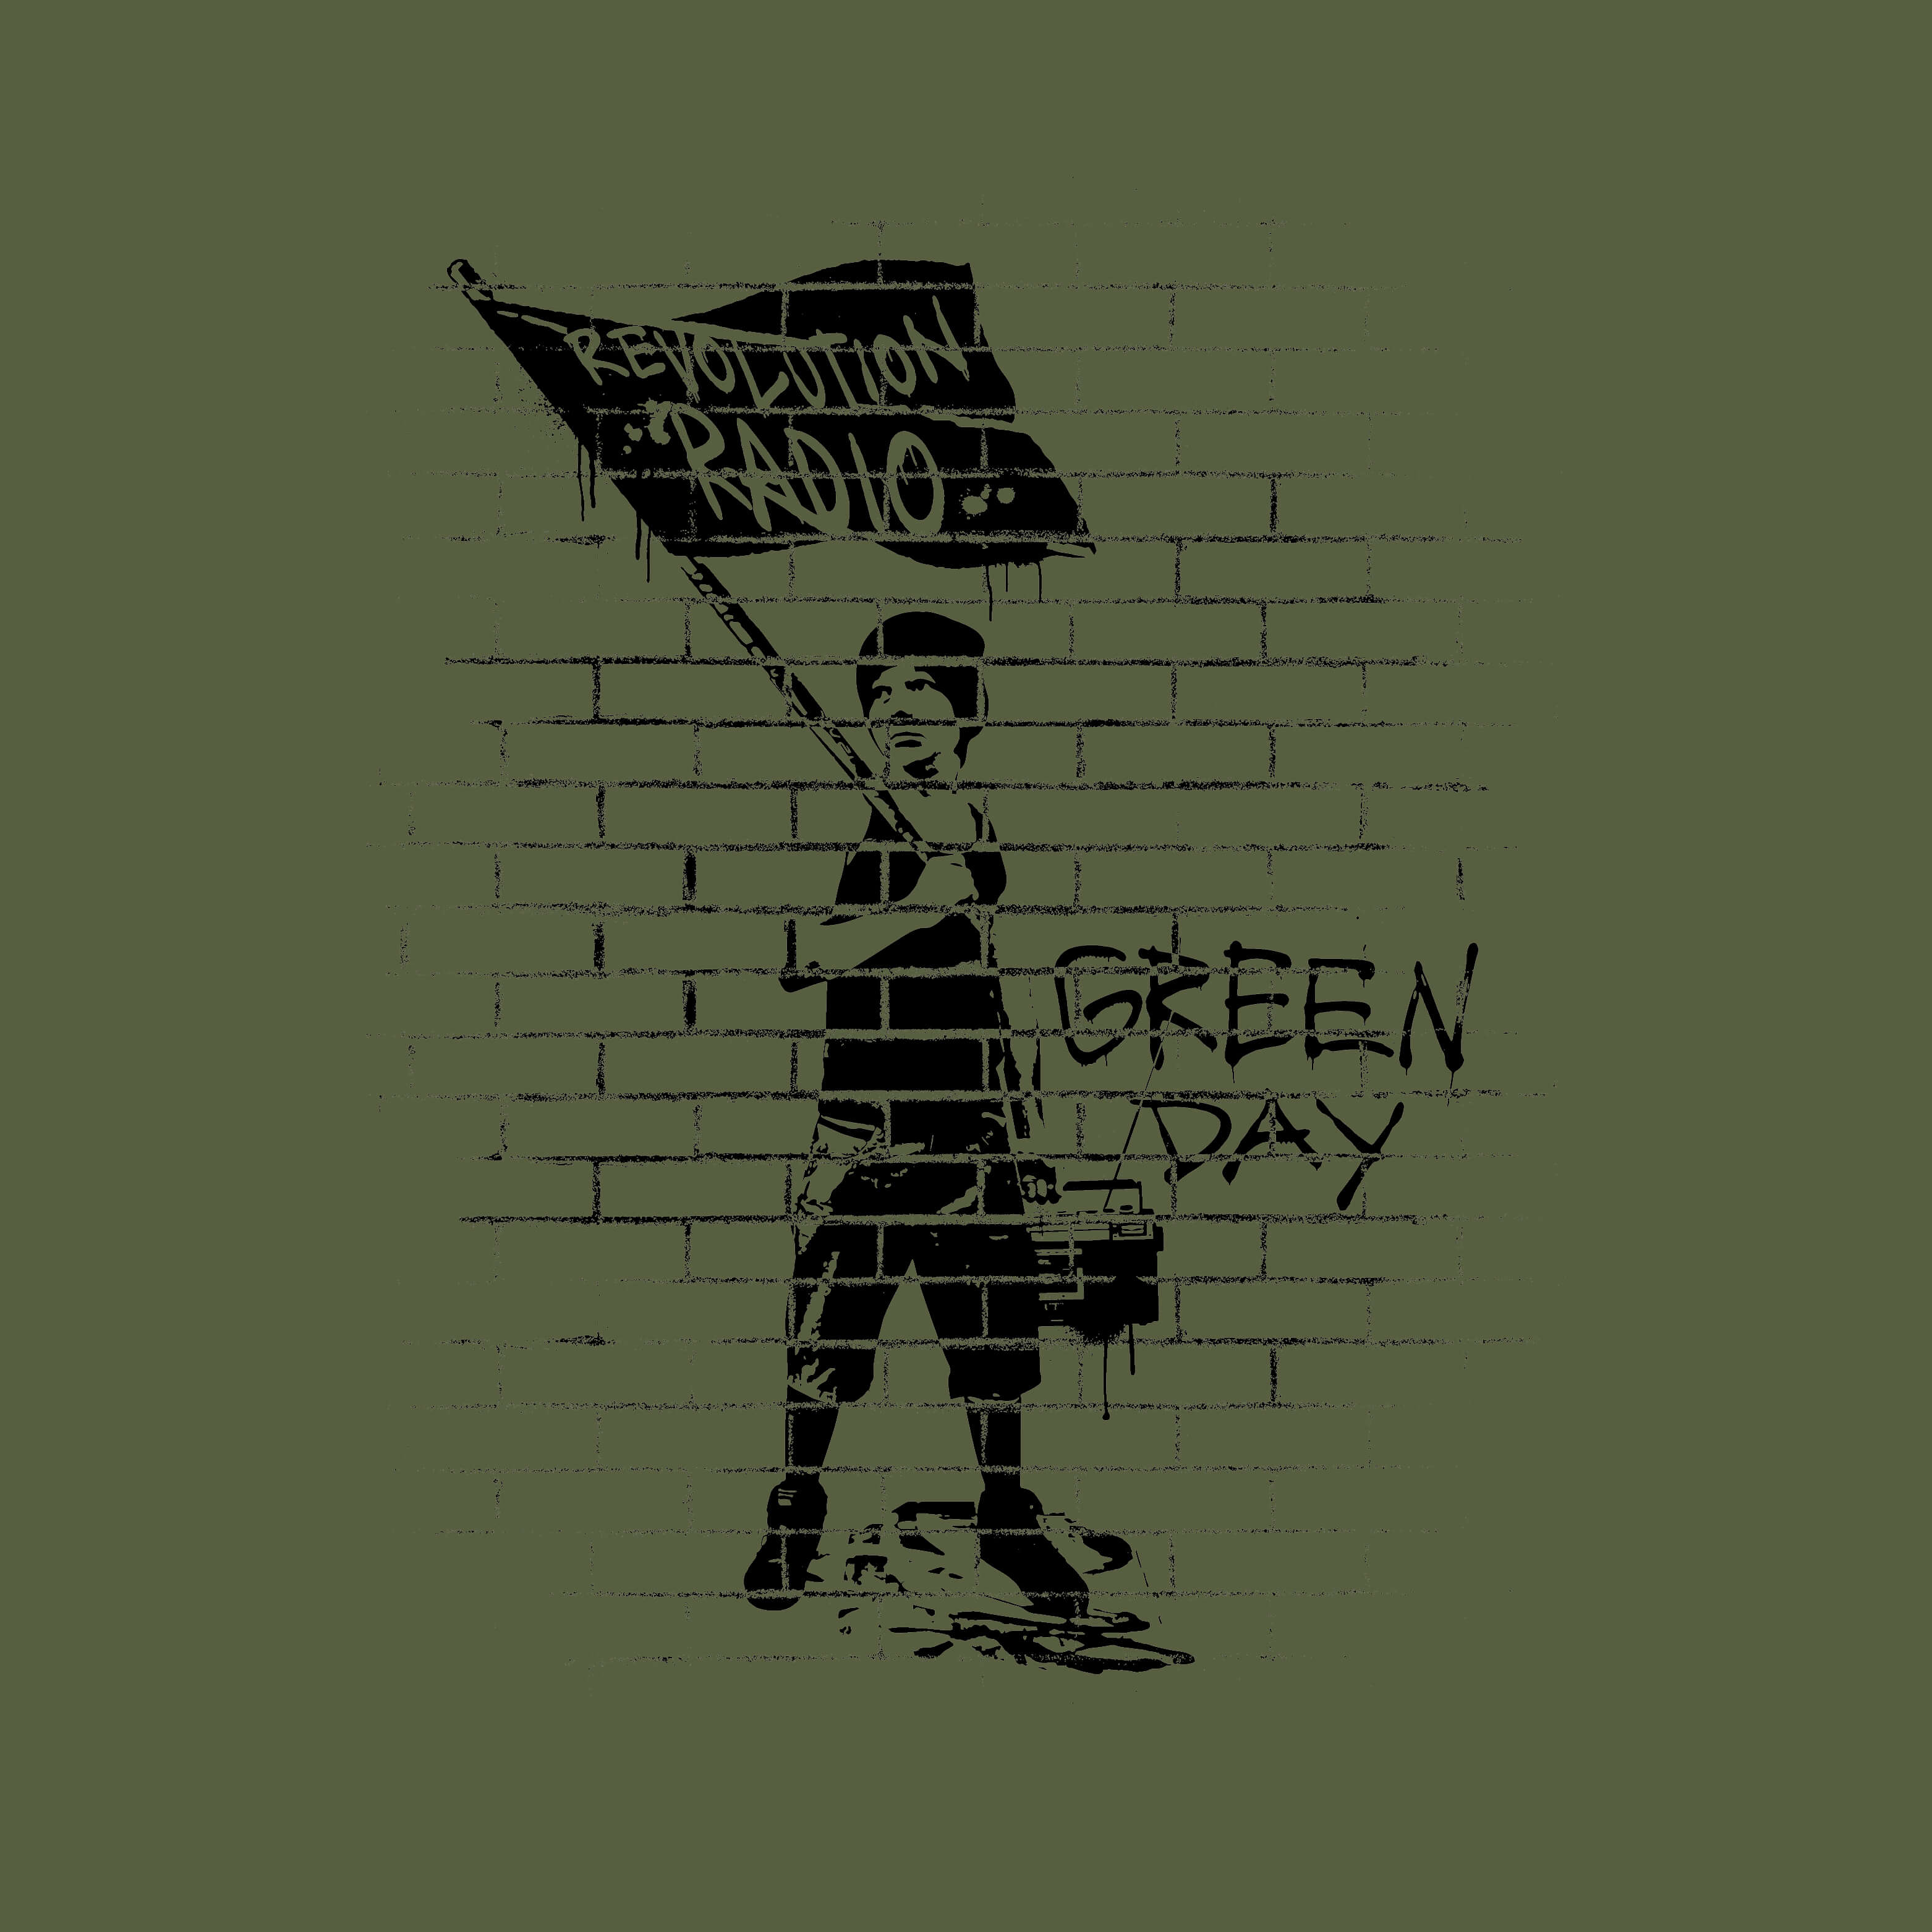 Green Day Wallpapers - Wallpaperboat